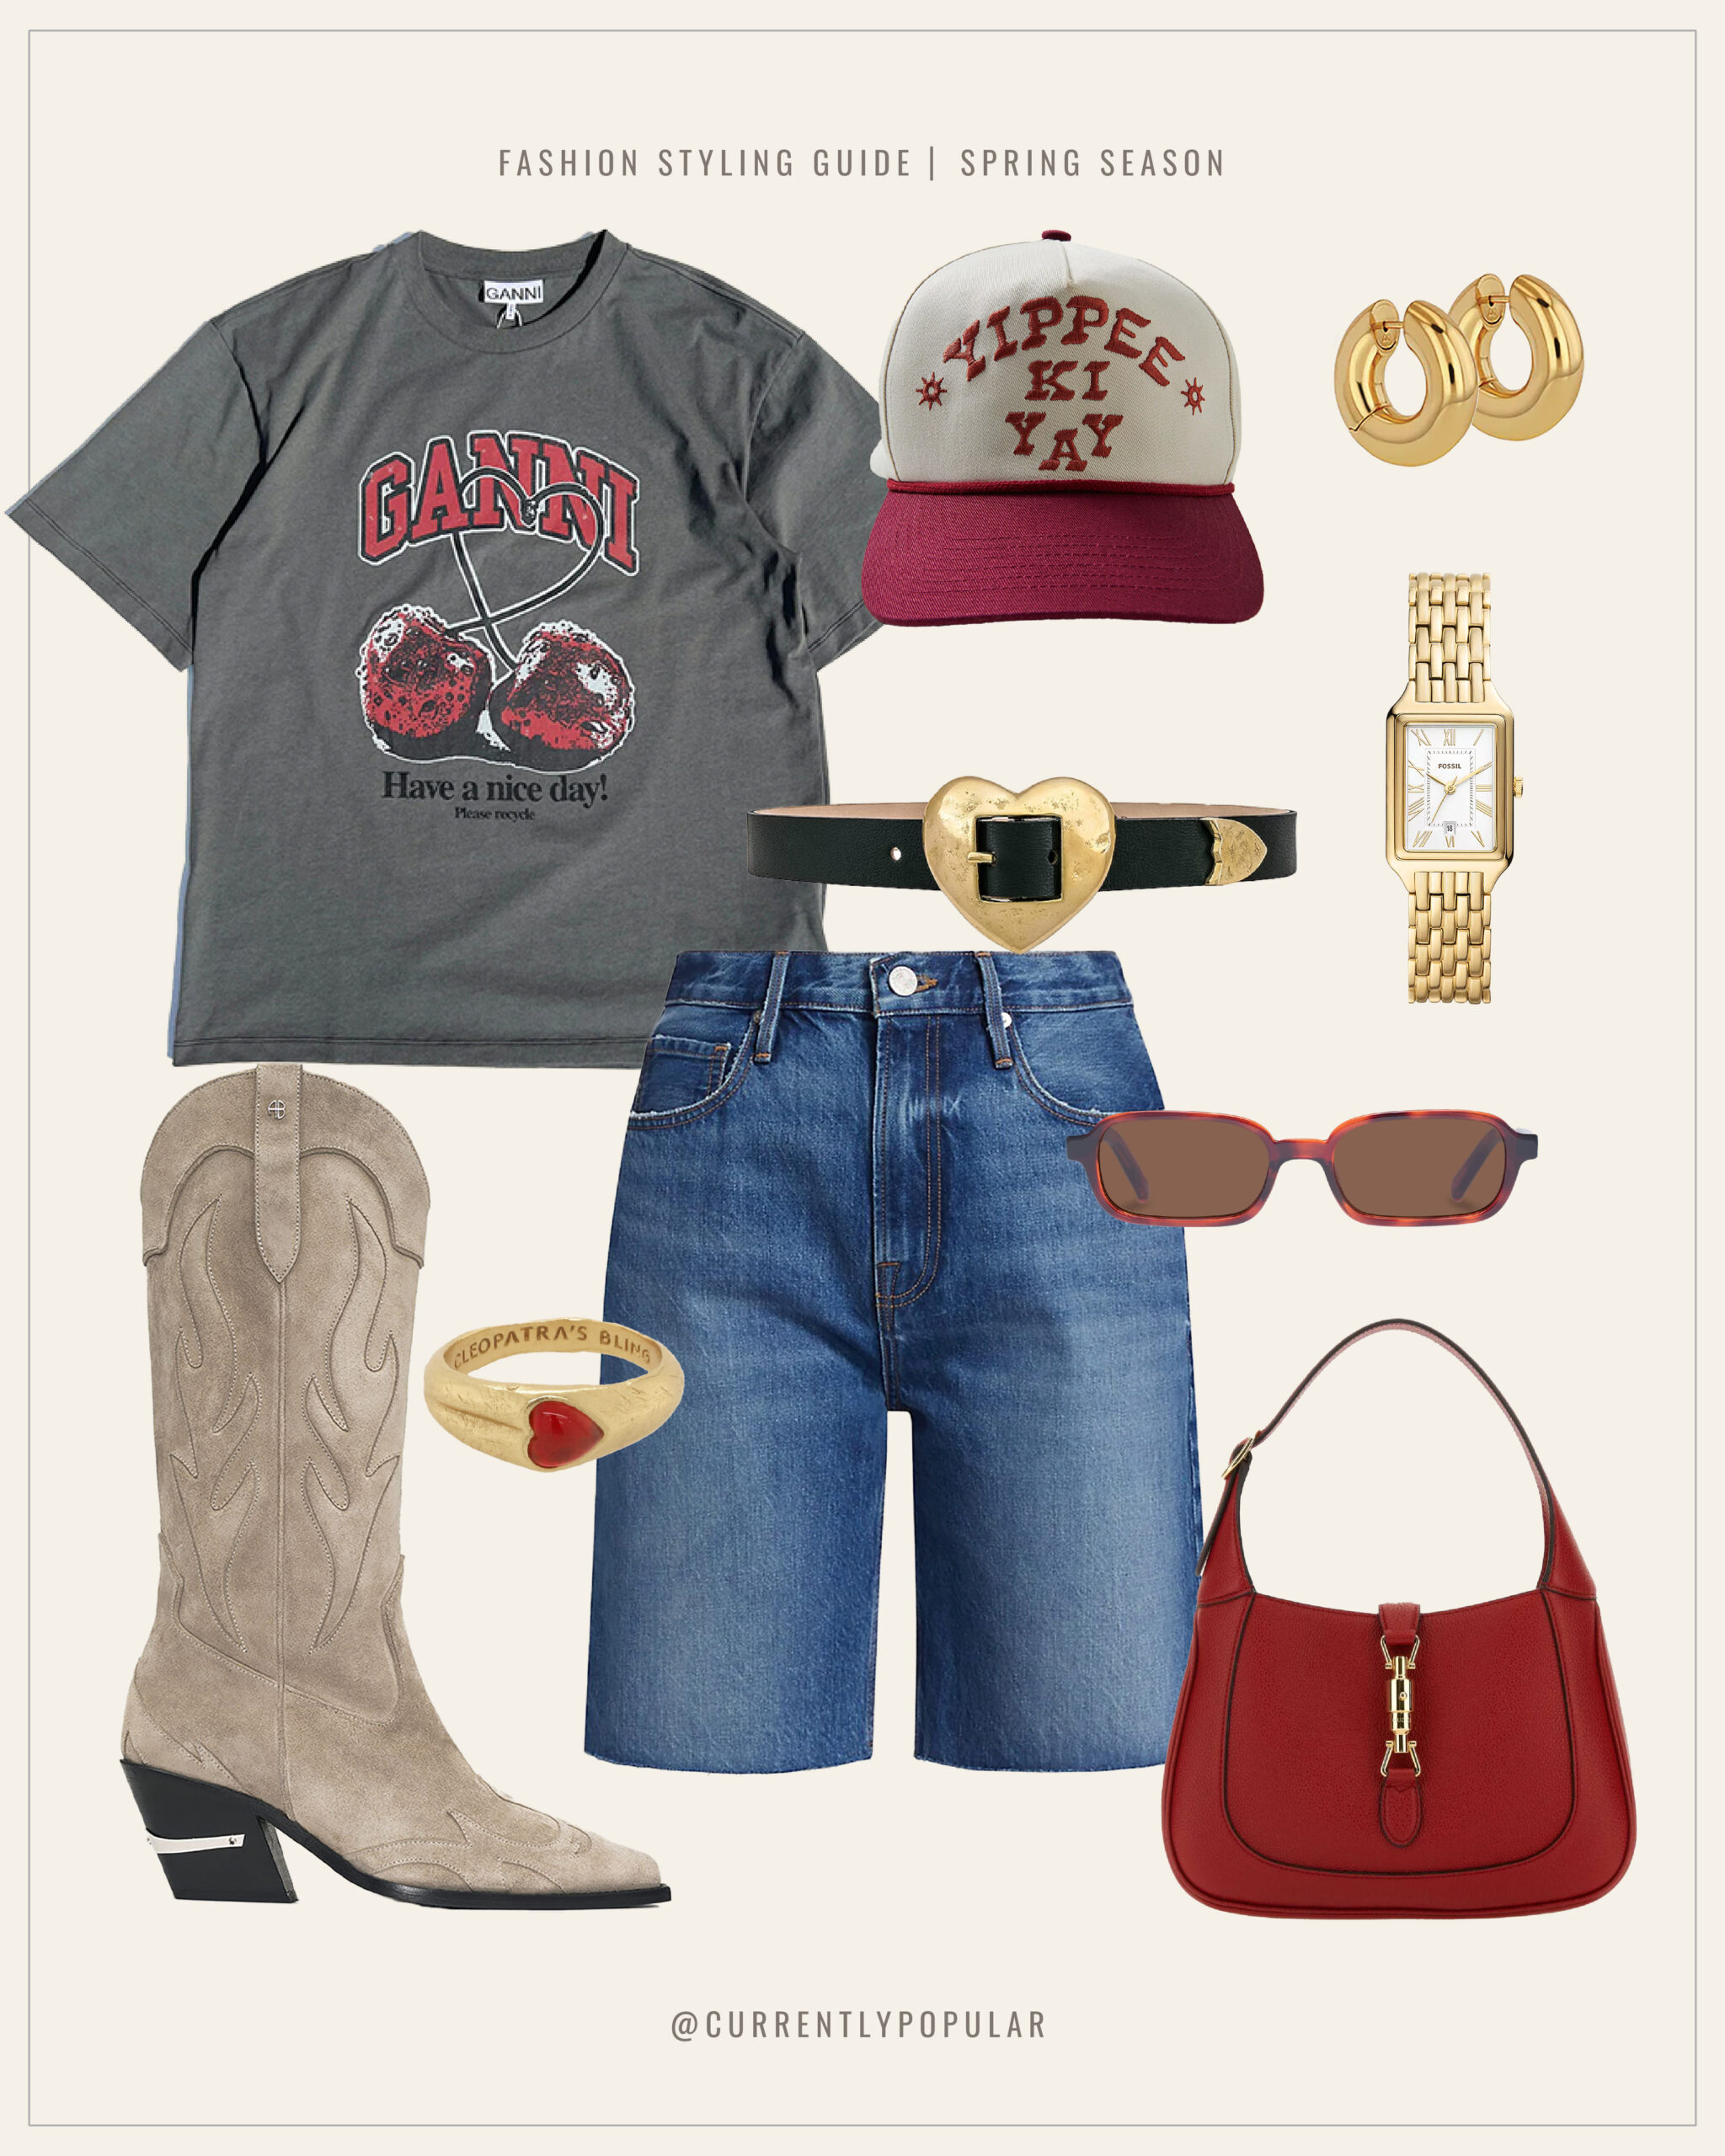 This is an image of a eclectic cowgirl inspired outfit. It features a graphic tee, cutoff denim shorts, suede cowboy boots, trucker hat, god jewelry, large buckled heart belt and a red Gucci purse